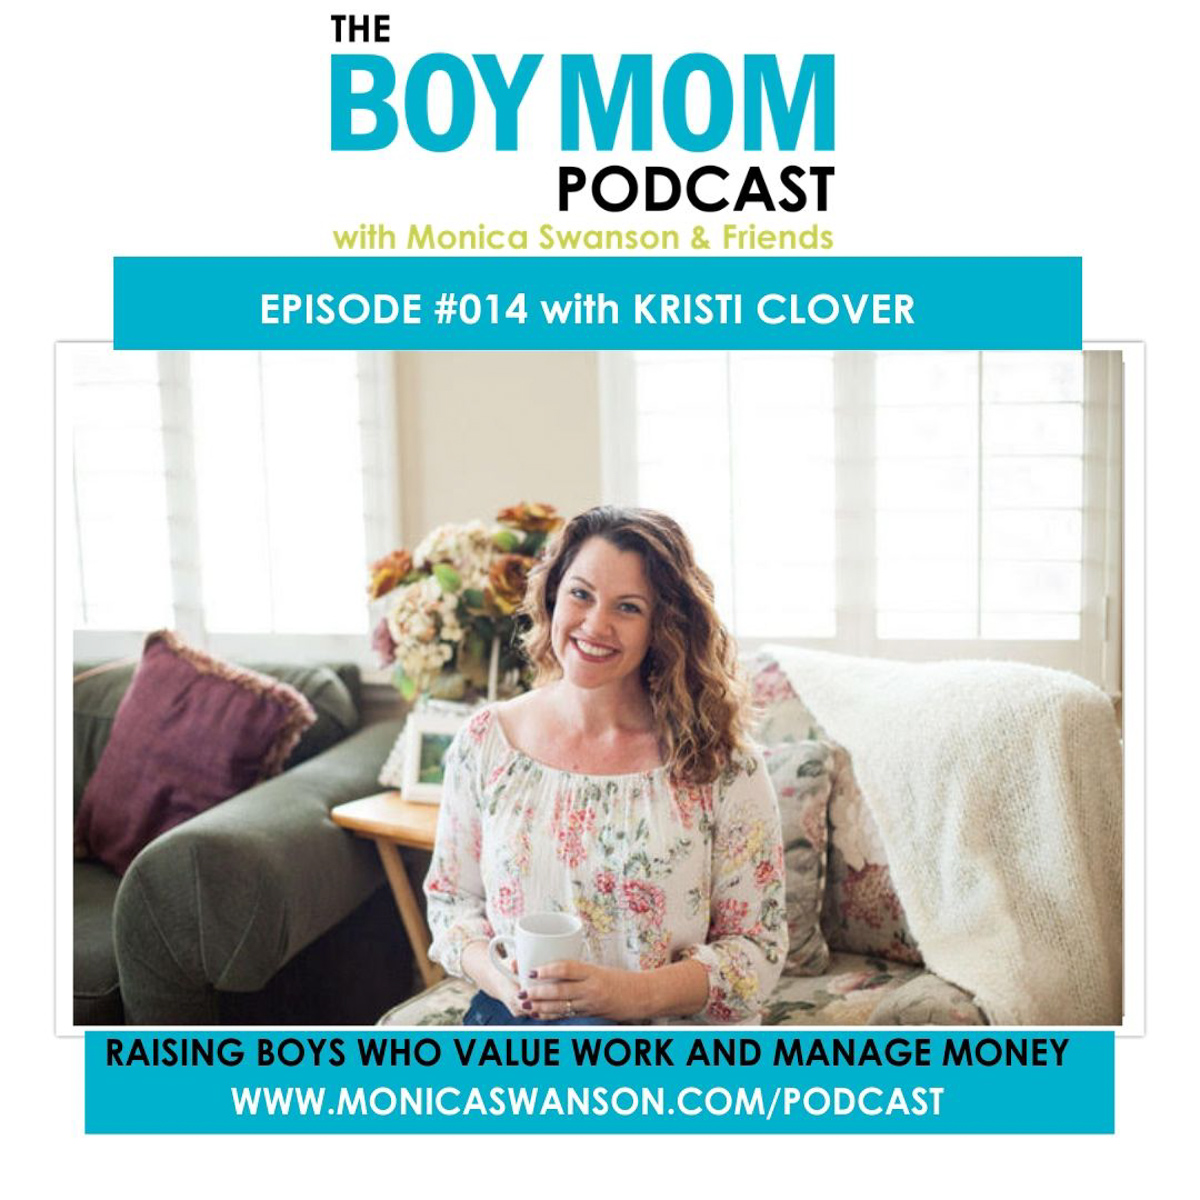 Raising Boys Who Value Work and Money Management {Podcast Episode 014 with Kristi Clover}